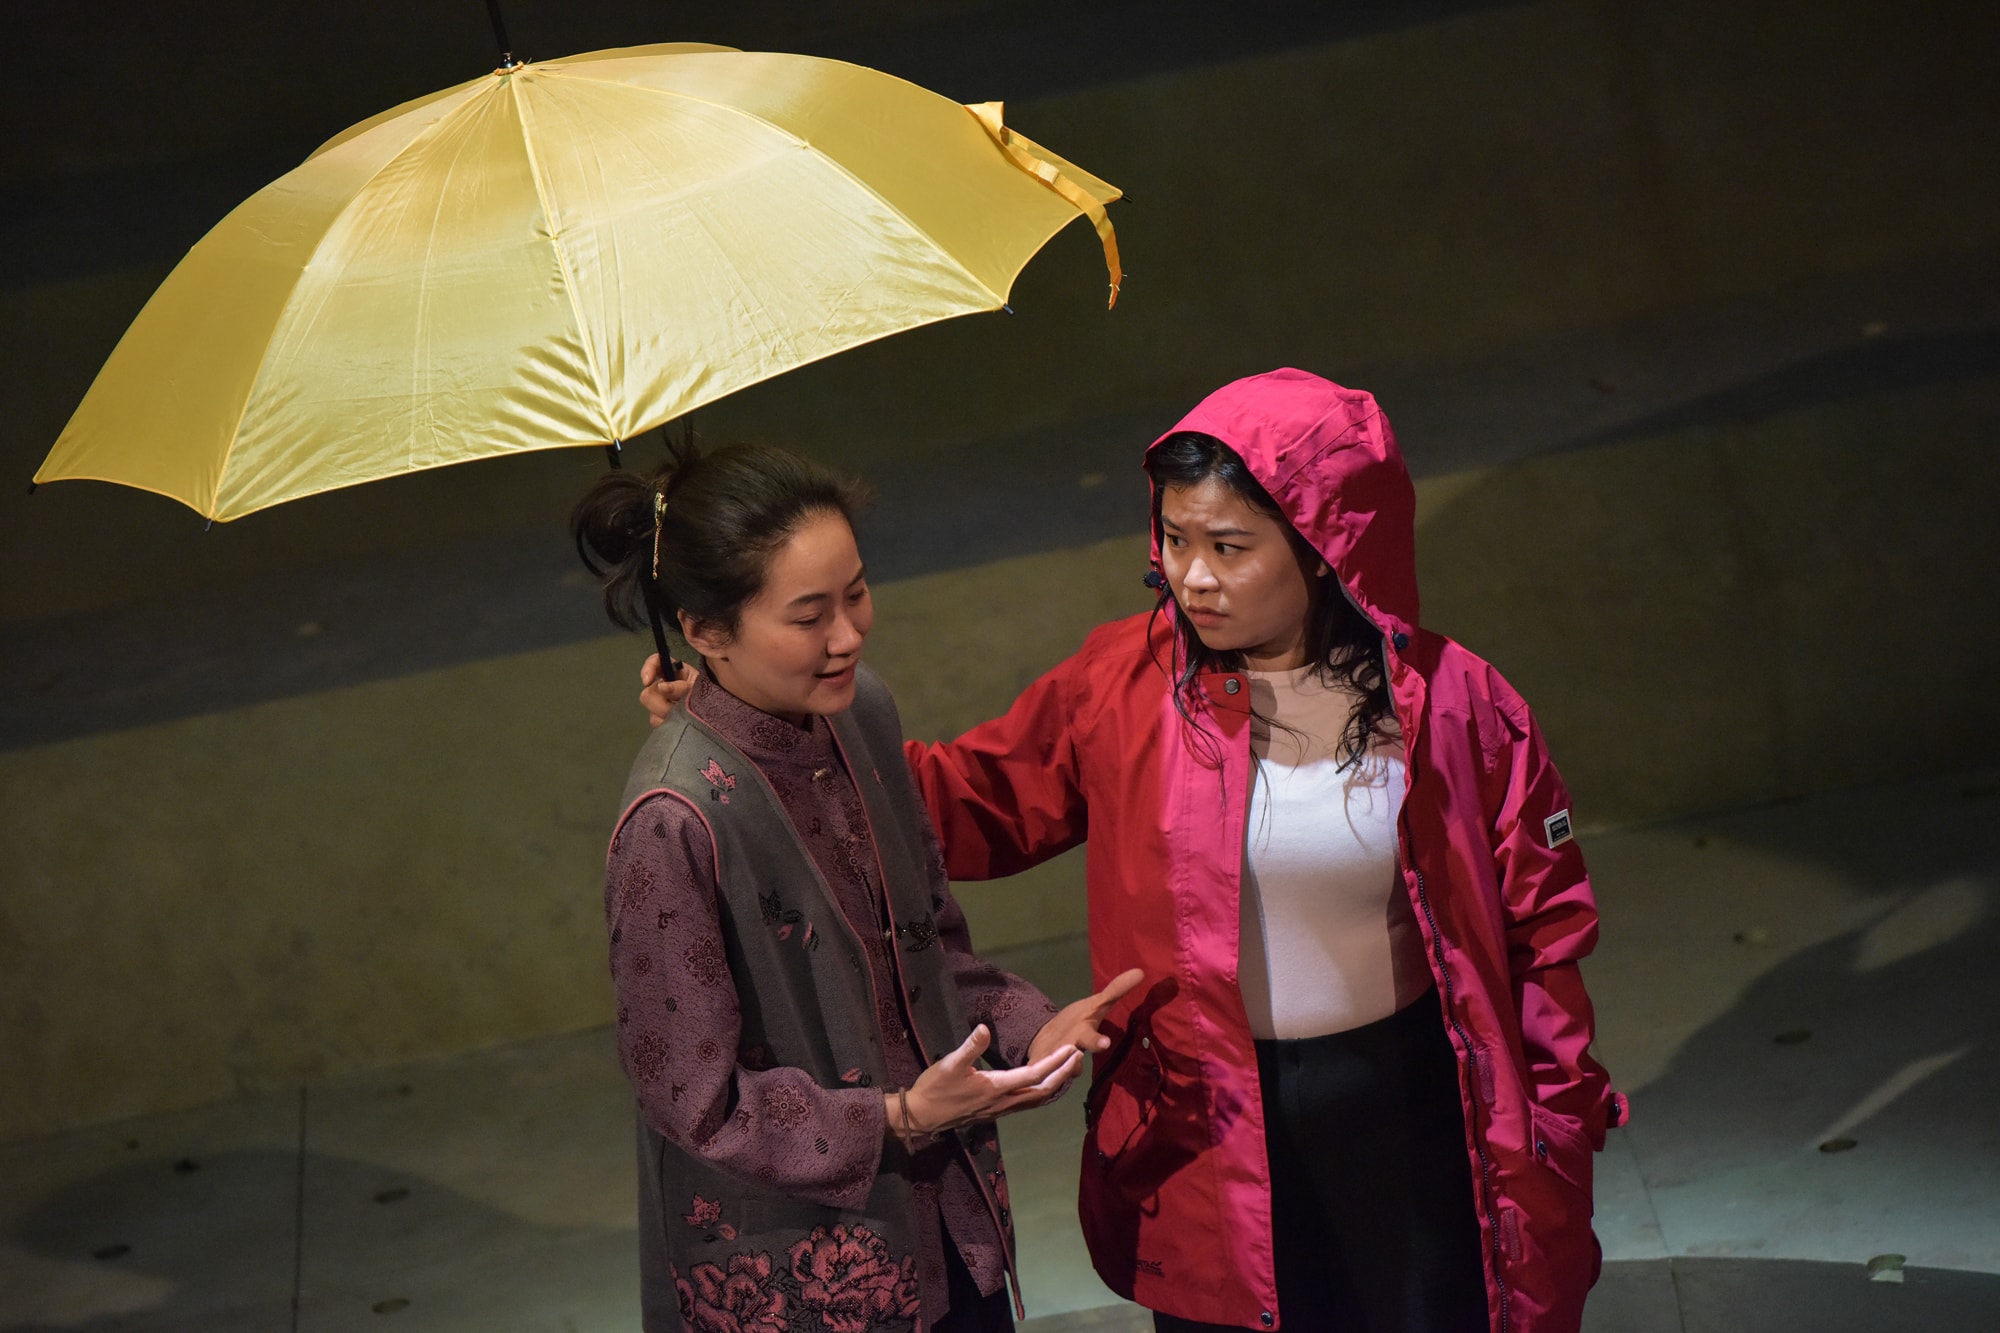 Charlotte Chiew and Mei Mac in Under the Umbrella